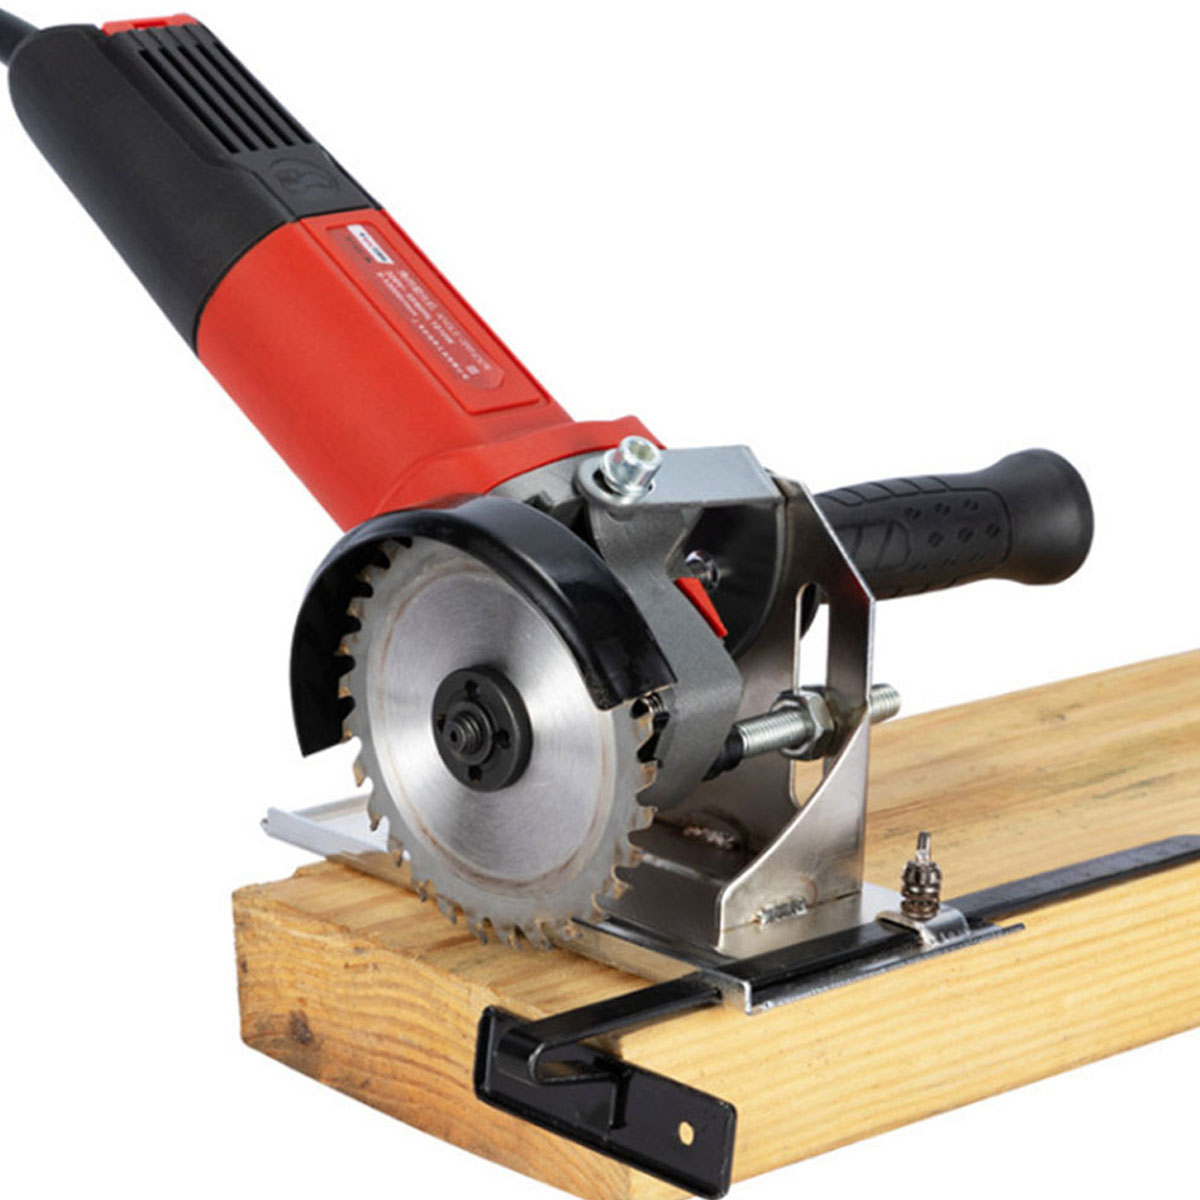 Drillpro-Multifunction-Angle-Grinder-Stand-Angle-Cutting-Bracket-with-Adjustable-Base-Plate-Cover-1775086-4